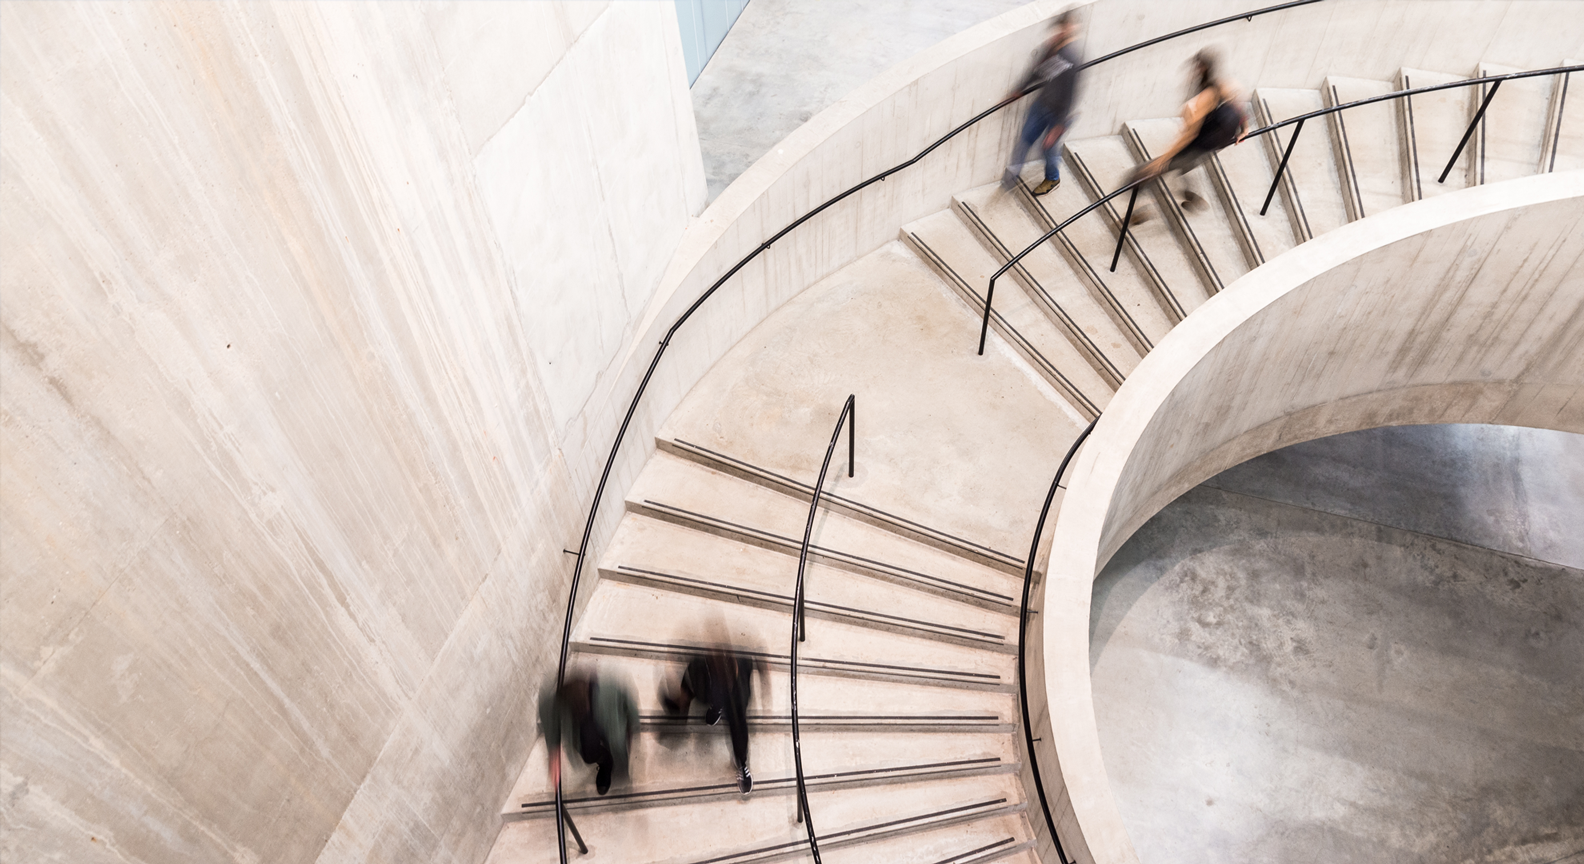 People walking down a spiral, circular staircase in a modern office building